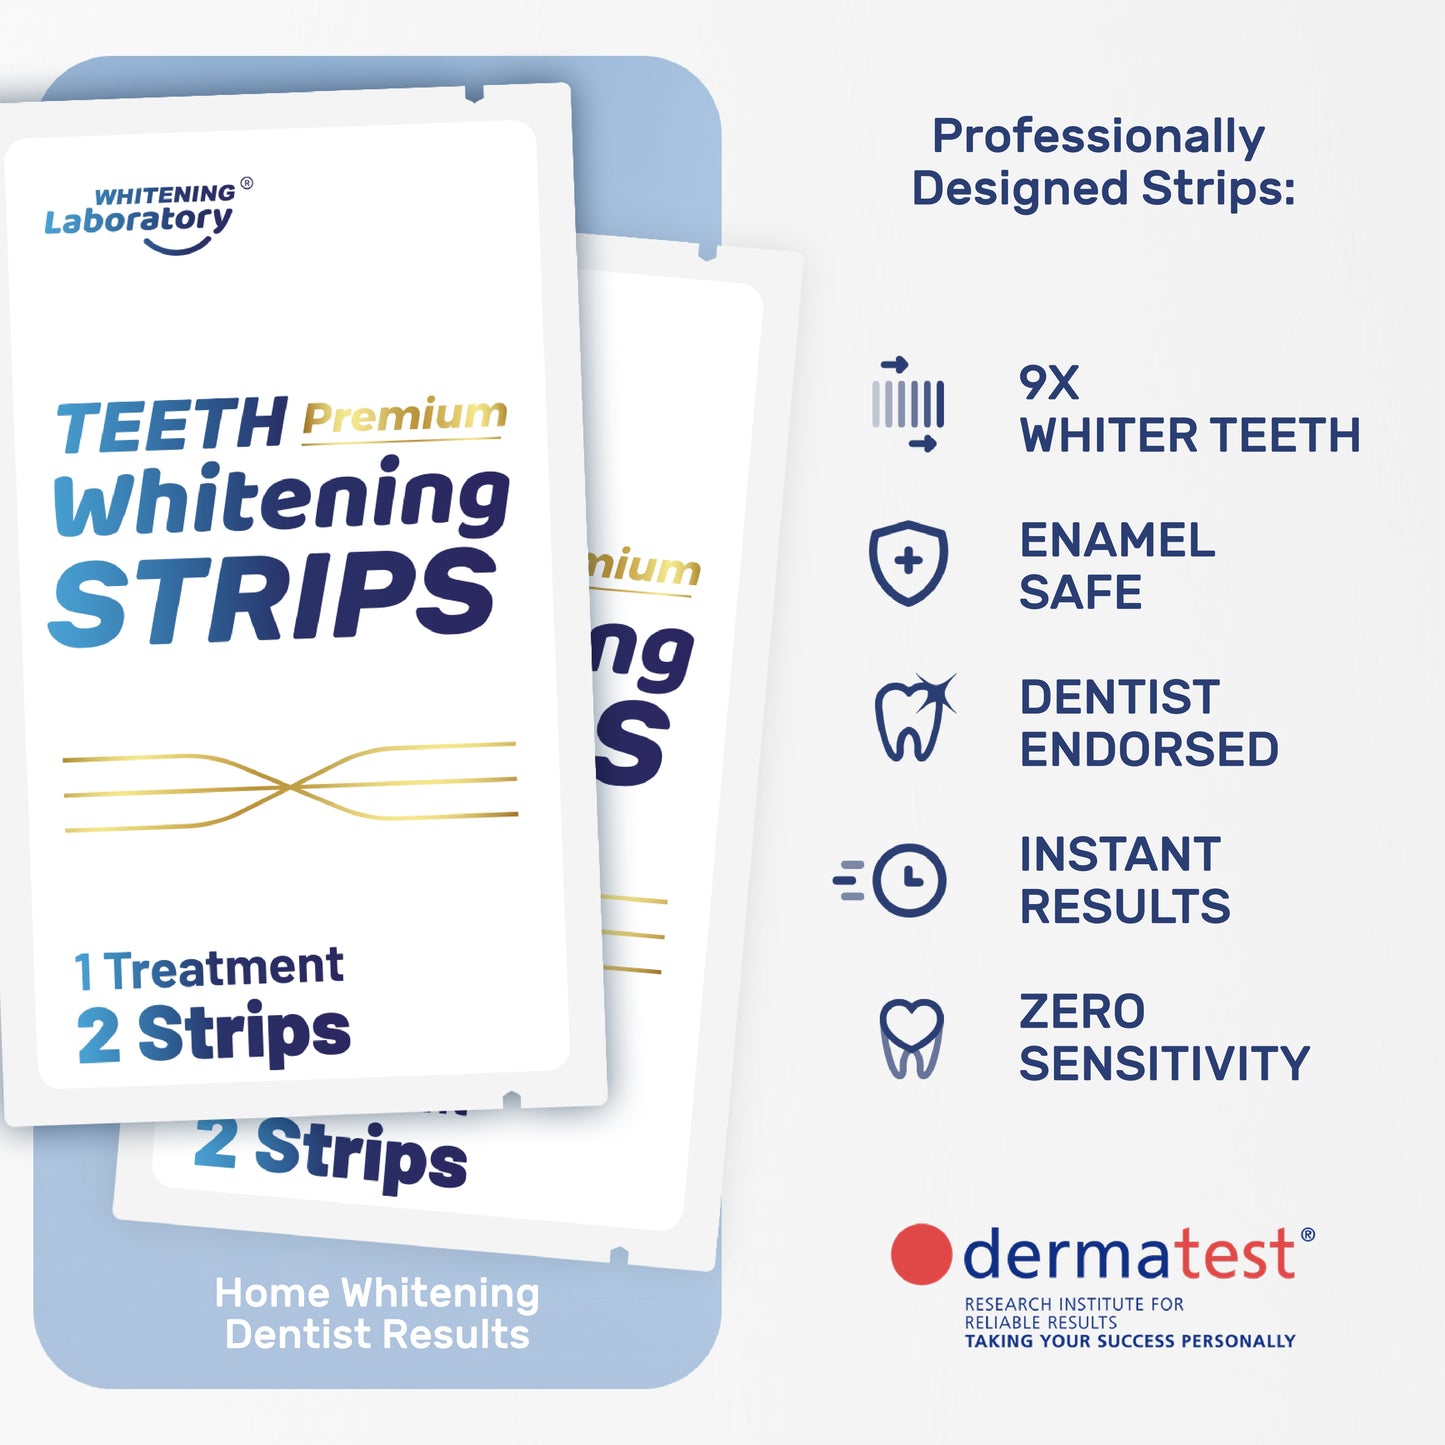 Key features of Whitening Laboratory Teeth Whitening Strips, including 9x whiter teeth, enamel safety, and dentist endorsement.